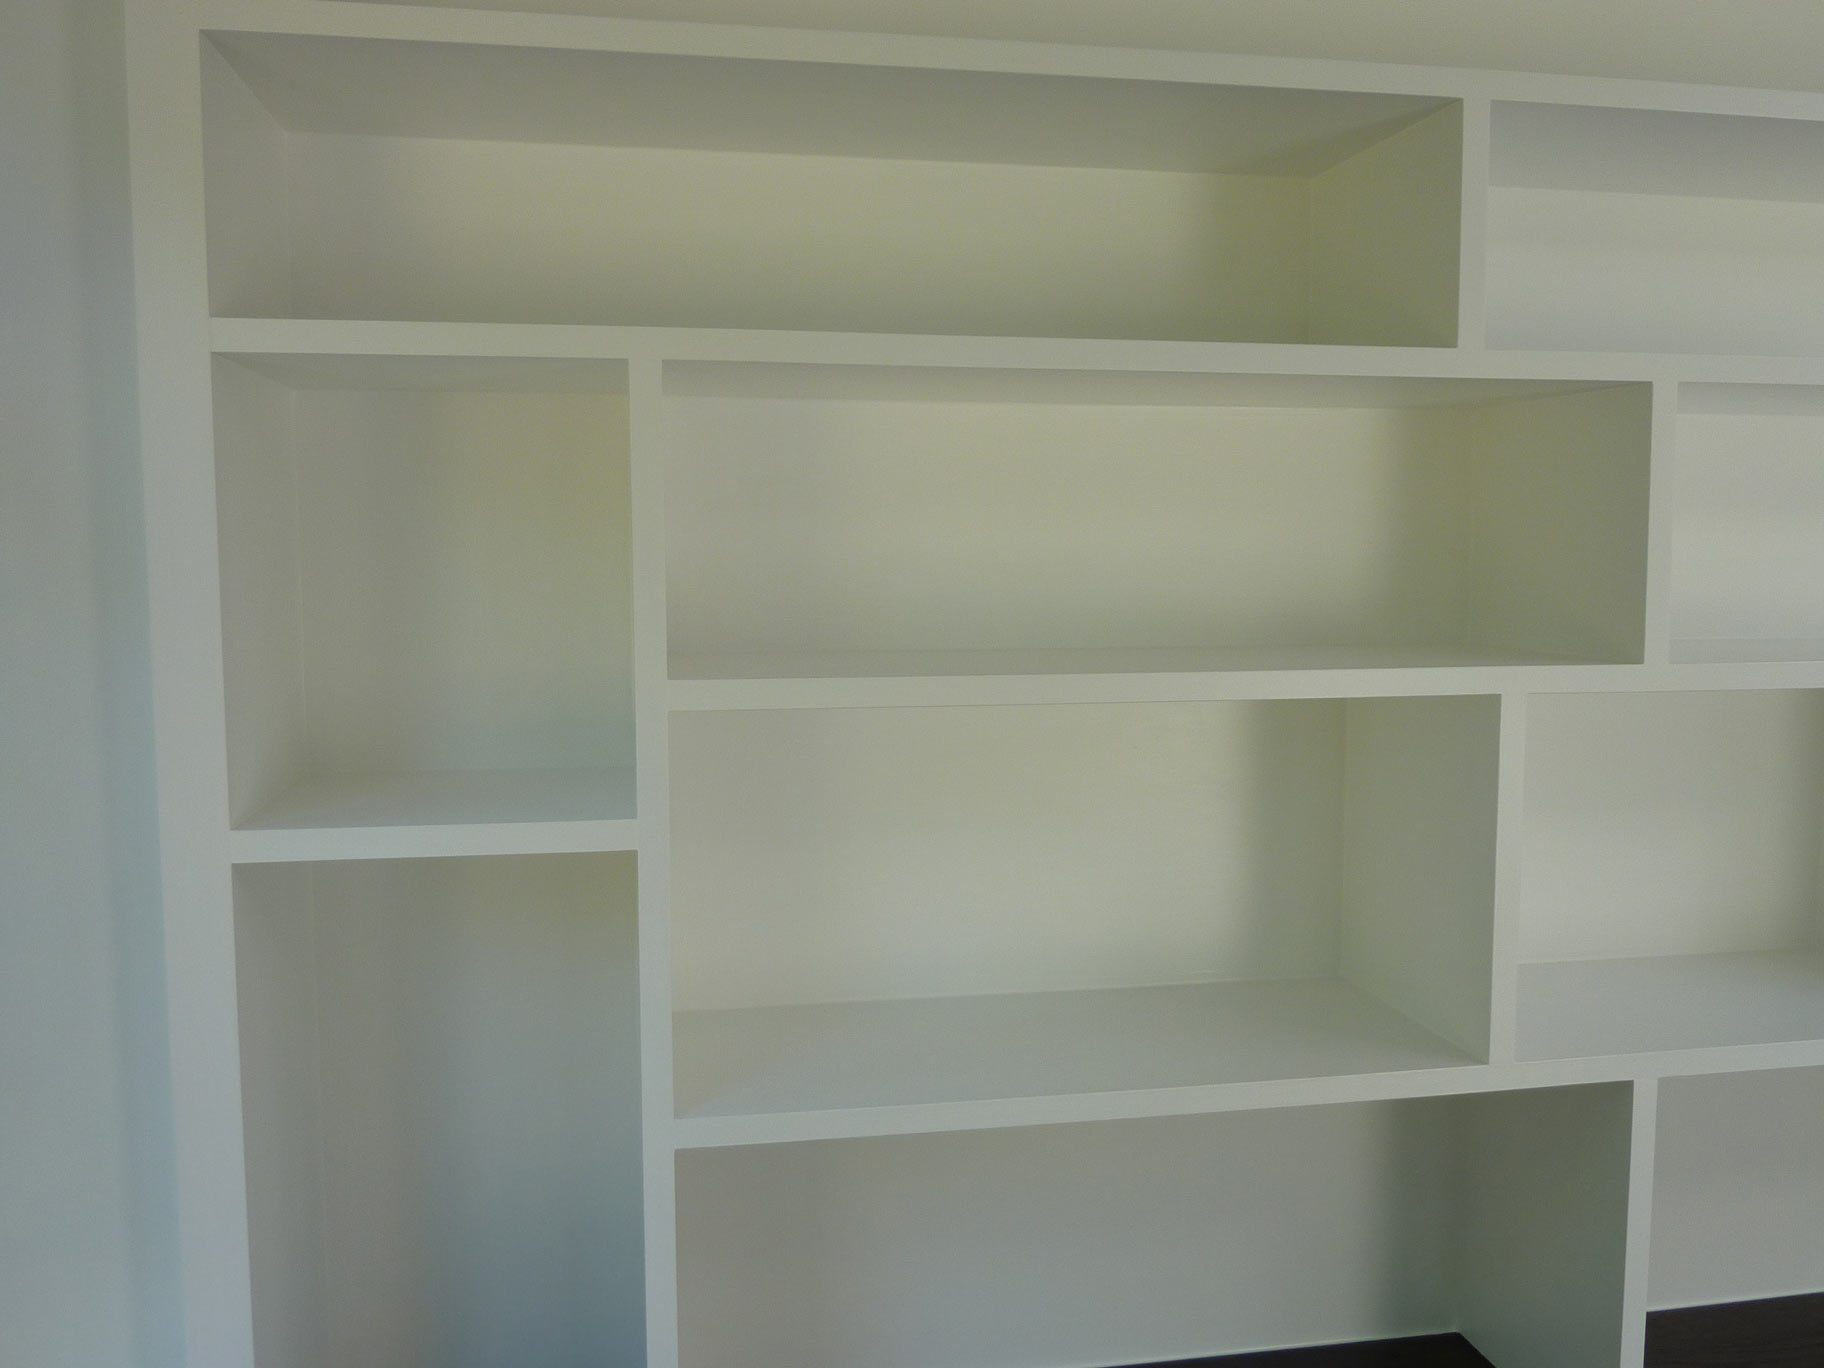 random shelving for books, box files, and decorative items in custom made fitted study